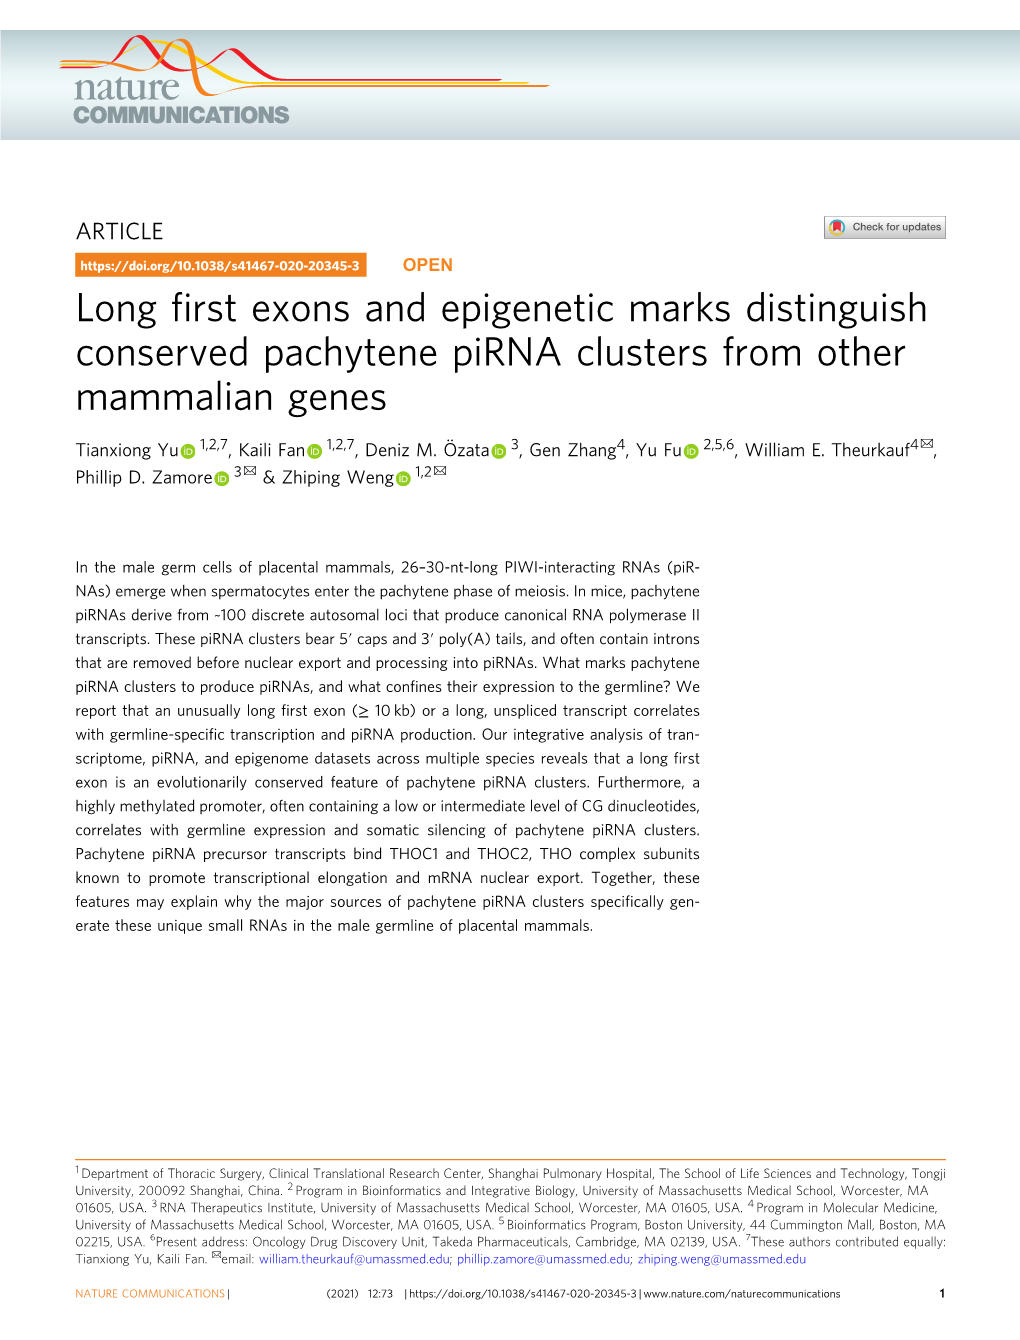 Long First Exons and Epigenetic Marks Distinguish Conserved Pachytene